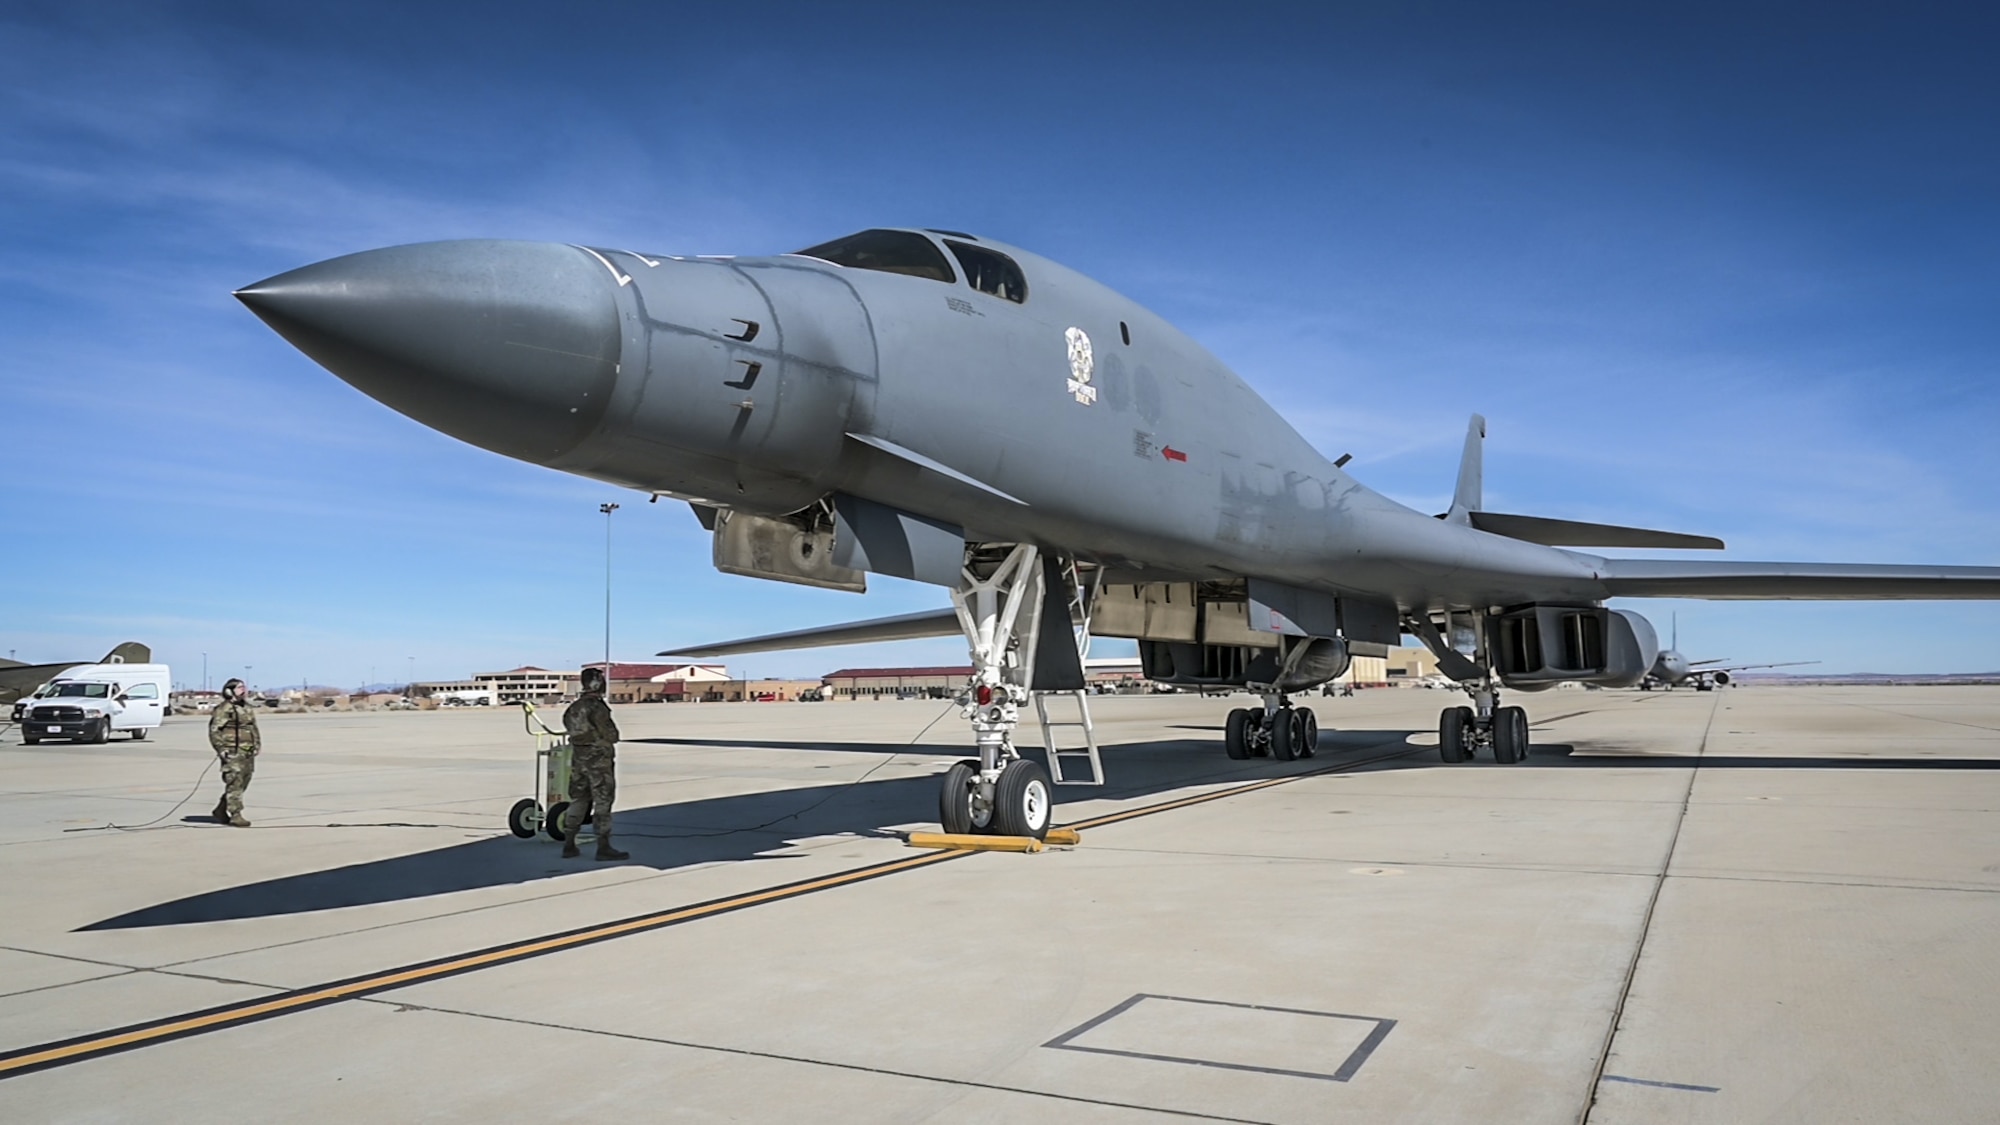 A recently retired B-1B Lancer, tail number 86-0099, begins to off-load its crew at Edwards Air Force Base, California, Feb. 23. The aircraft will become the Edwards Aircraft Ground Integration Lab, or EAGIL, a non-flyable aircraft that will be used as an integration lab for future upgrades. (Air Force photo by Giancarlo Casem)